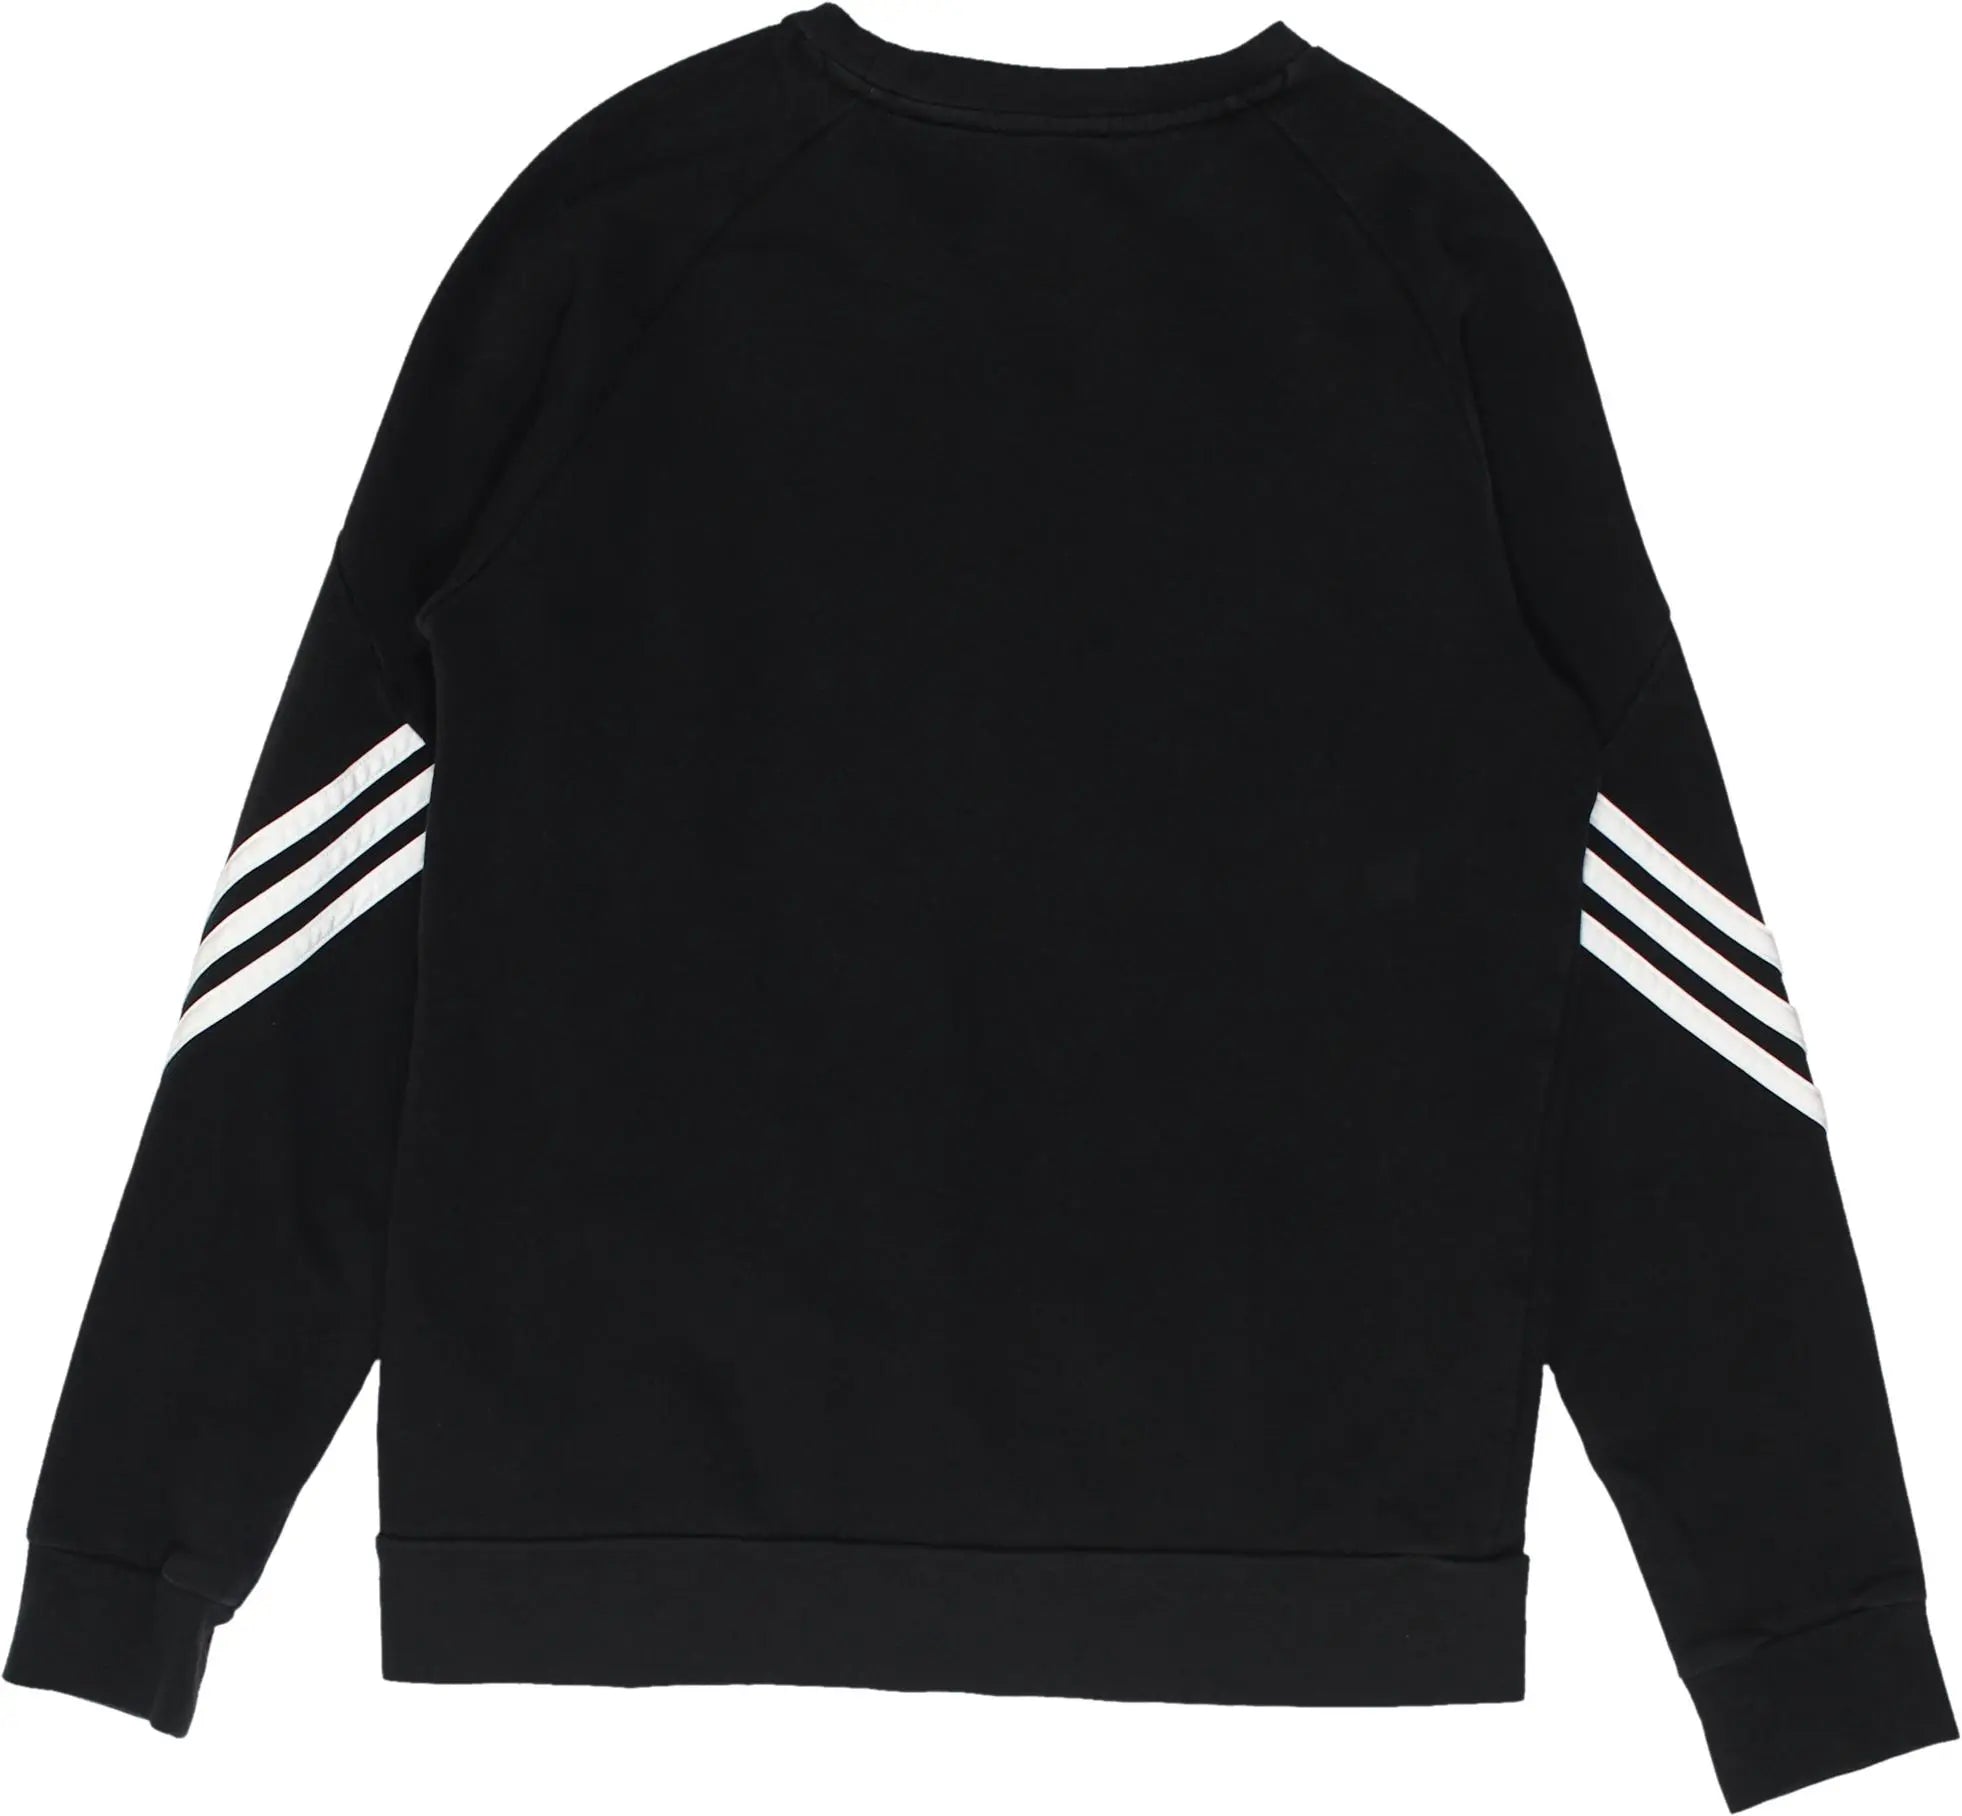 Adidas - Sweater by Adidas- ThriftTale.com - Vintage and second handclothing